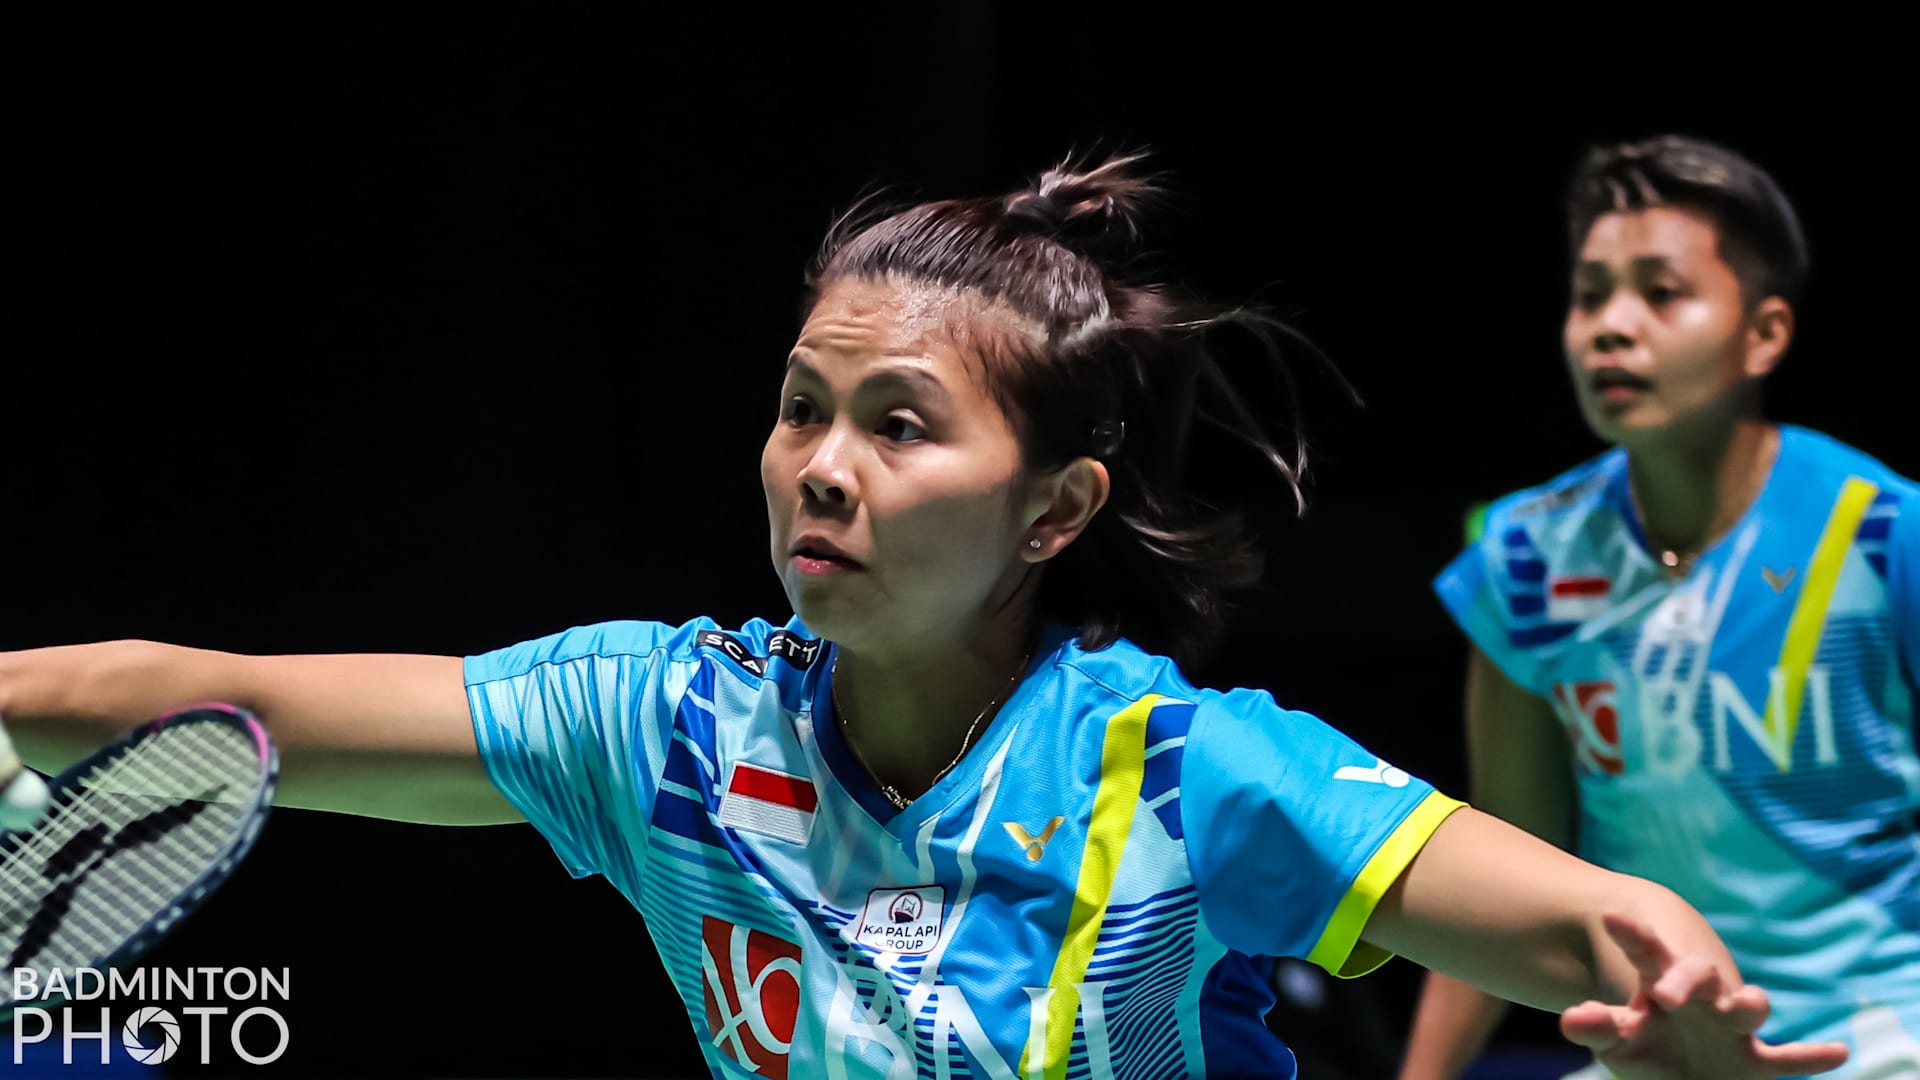 All England Open Badminton Championships 2022 Live updates day 2 including Viktor Axelsen, Lee Zii Jia, Sindhu, Momota Kento and Anthony Ginting